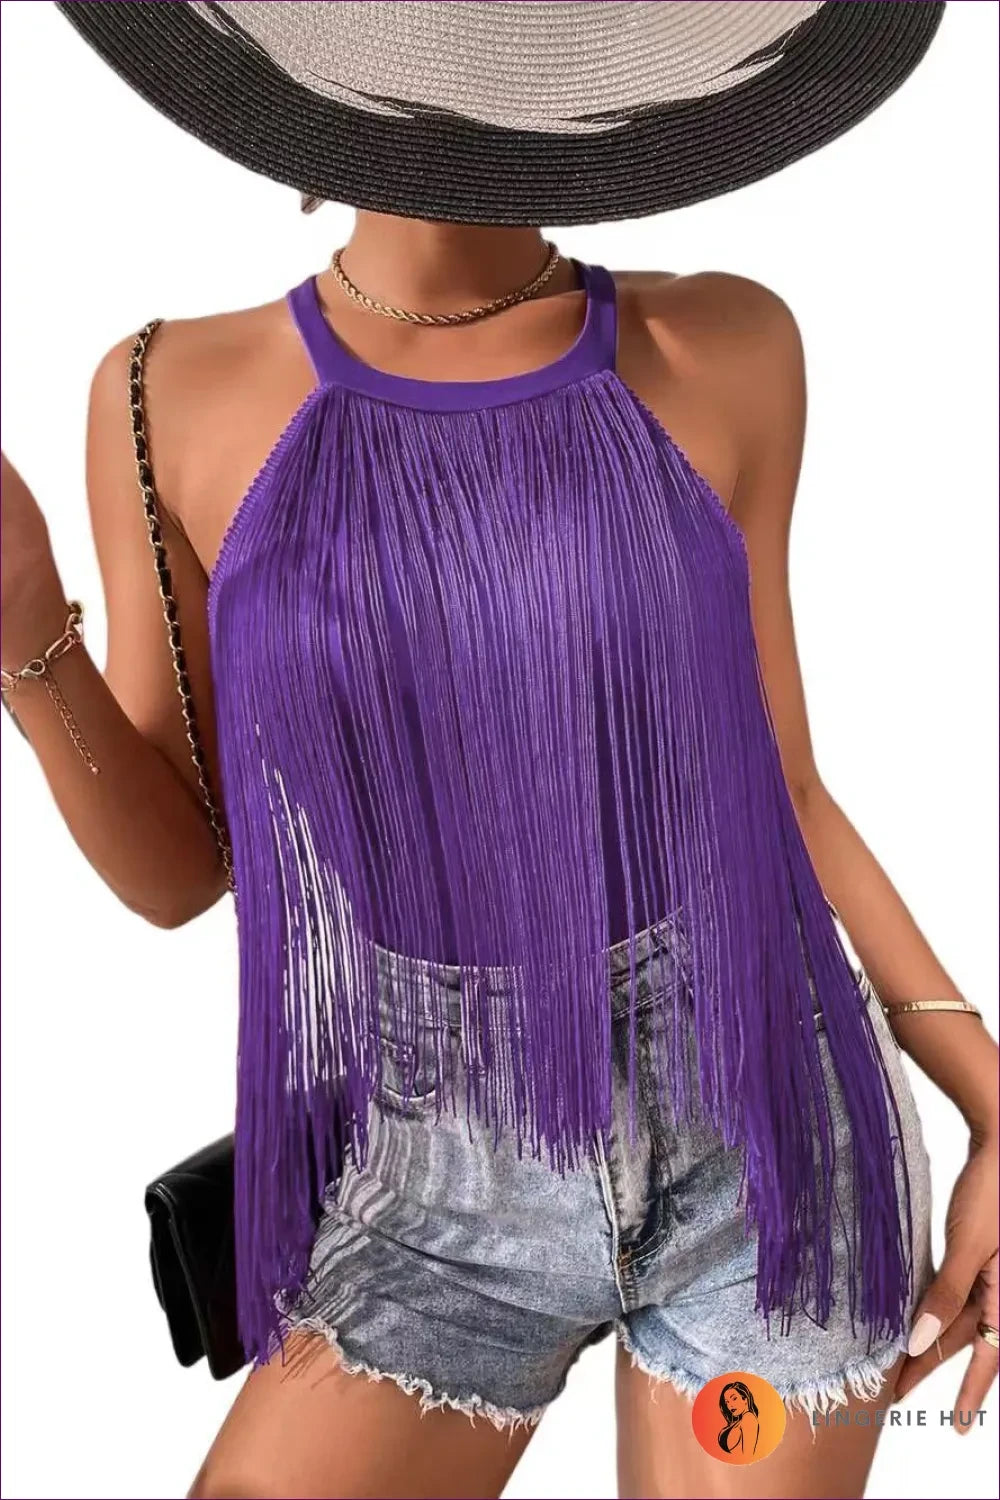 Embrace Your Boho Goddess With This Stylish Halter Top. Perfect For Beach Vibes Or Vacation Adventures. Pair